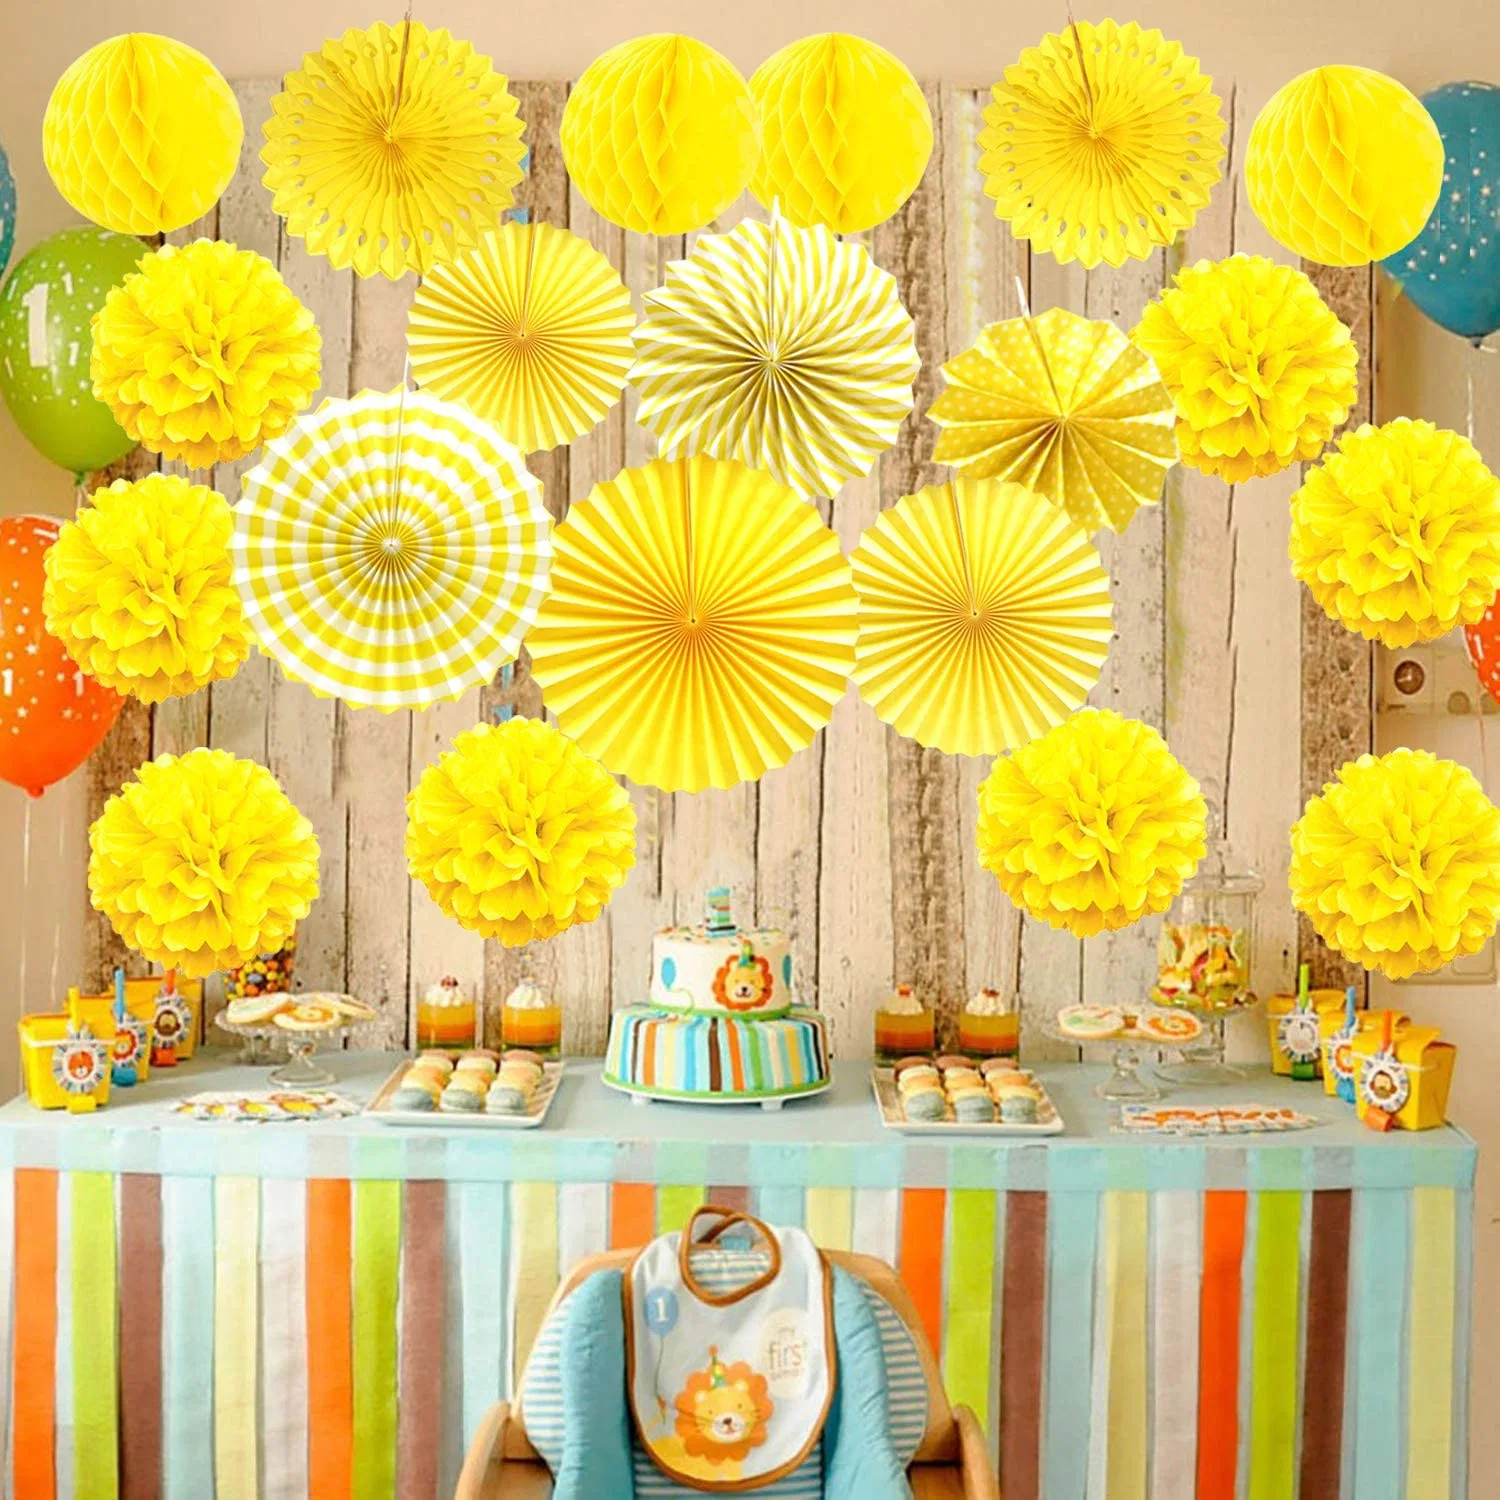 21 PCS Yellow Hanging Paper Fans POM Poms Flowers, Garlands String Polka DOT and Triangle Bunting Flags for Birthday Baby Shower Wedding Party Decorations